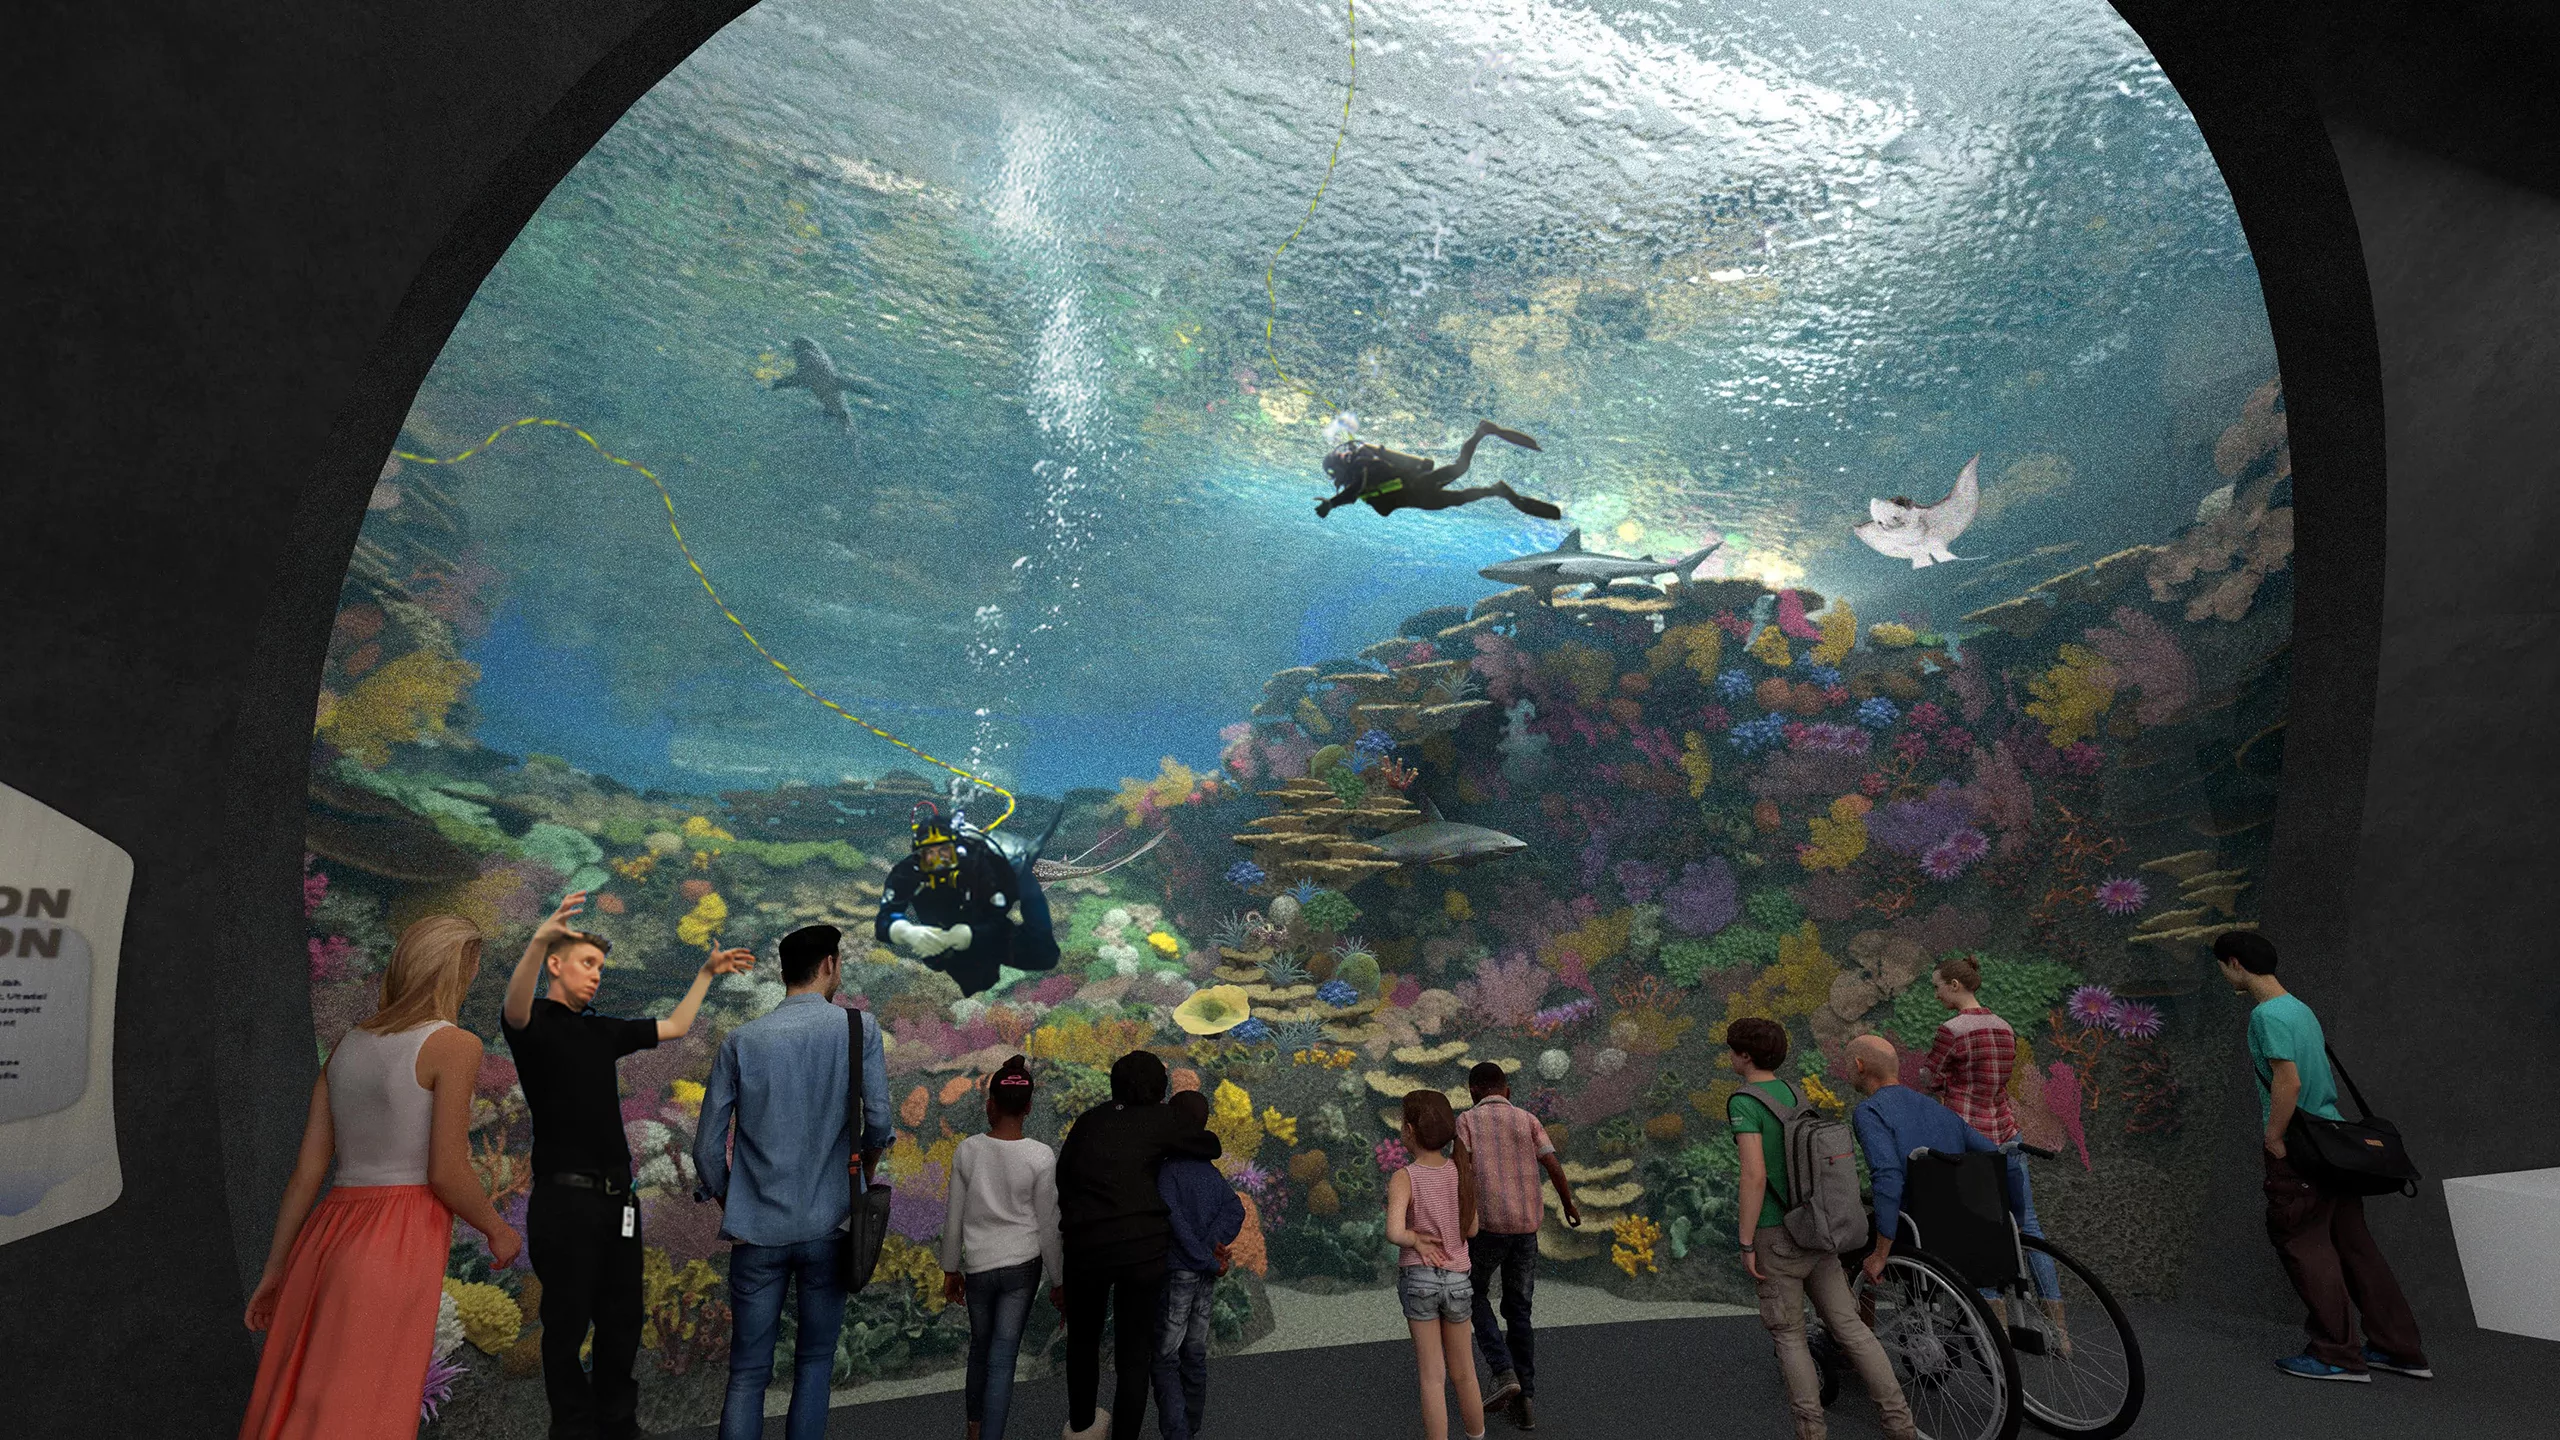 Interior view of Seattle Aquarium Ocean Pavilion visitors peering into The Reef exhibit featuring SCUBA divers surrounded by sharks, fish, rays, and coral